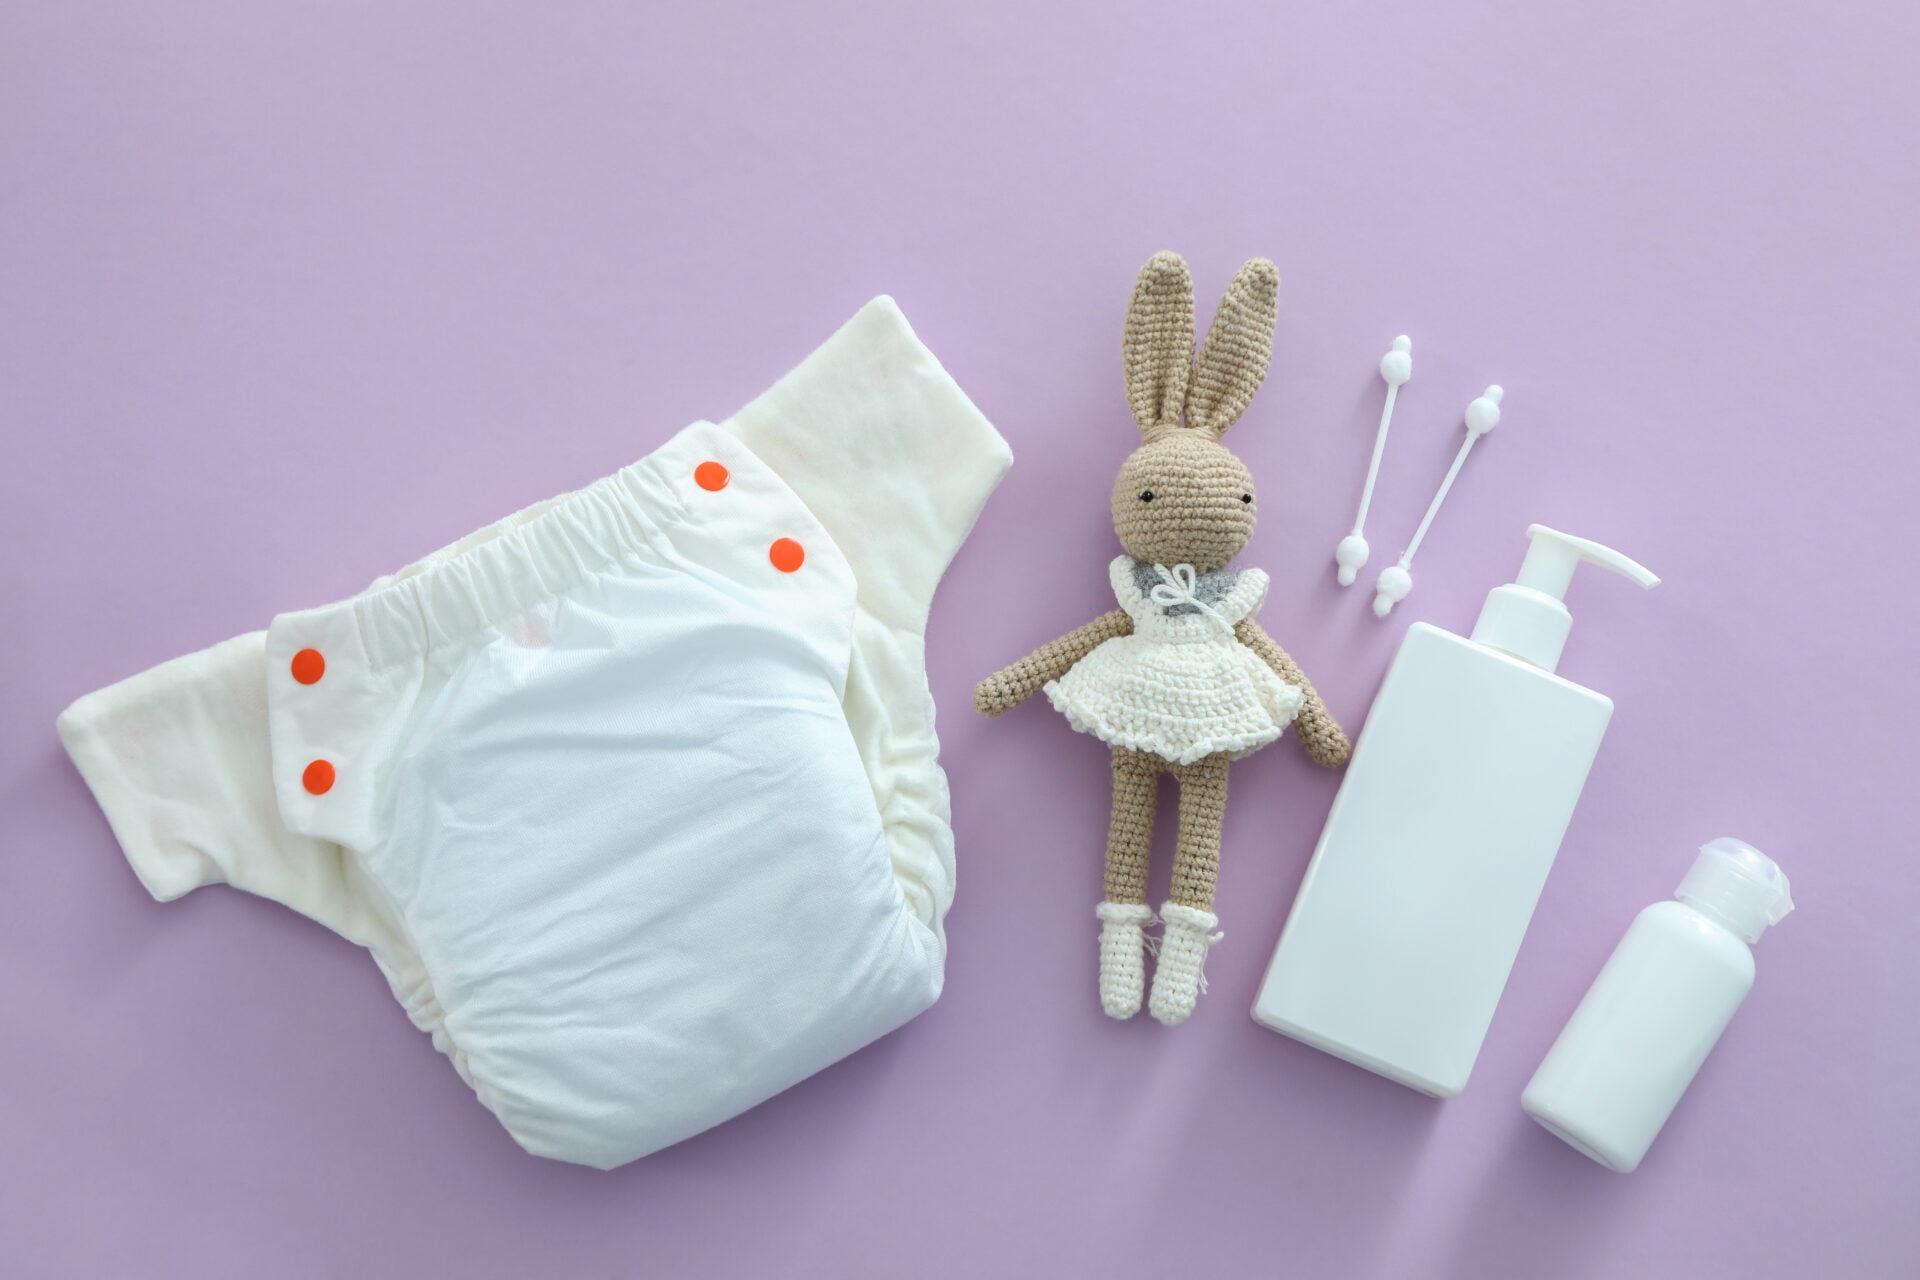 Concept of baby clothes with reusable diapers on purple background